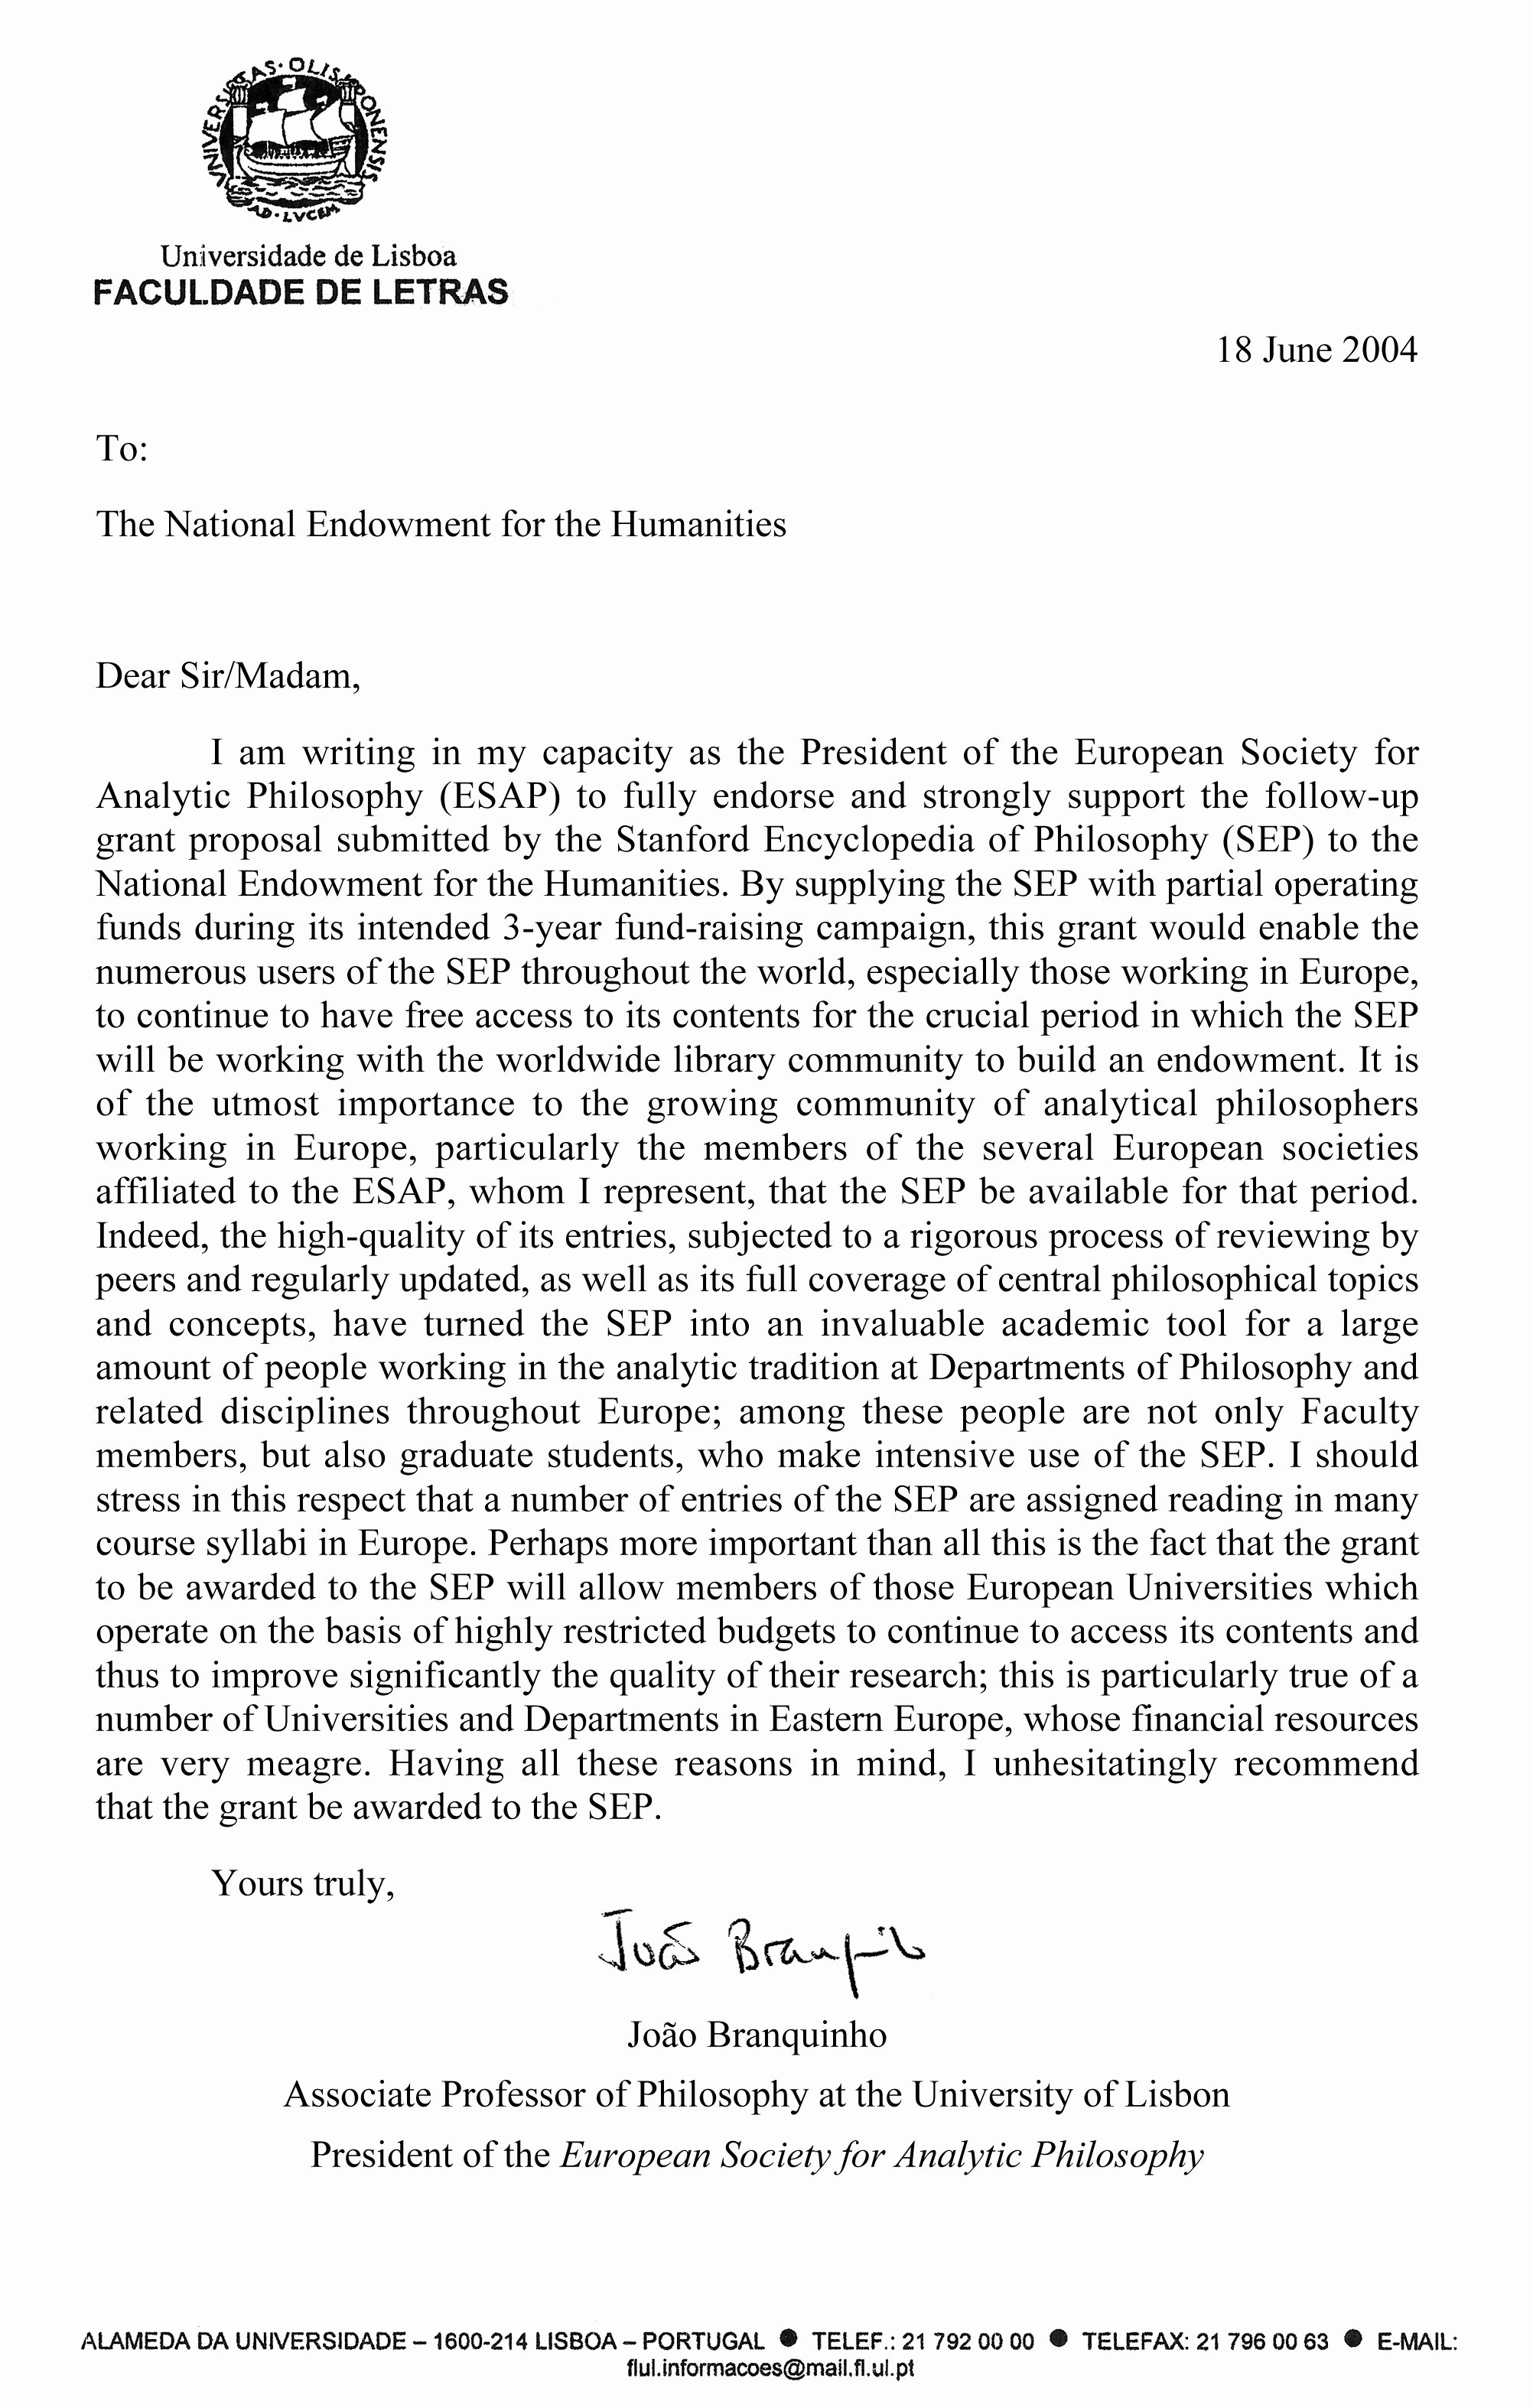 Letter Of Support format Inspirational Esap S Letter In Support Of Neh Grant